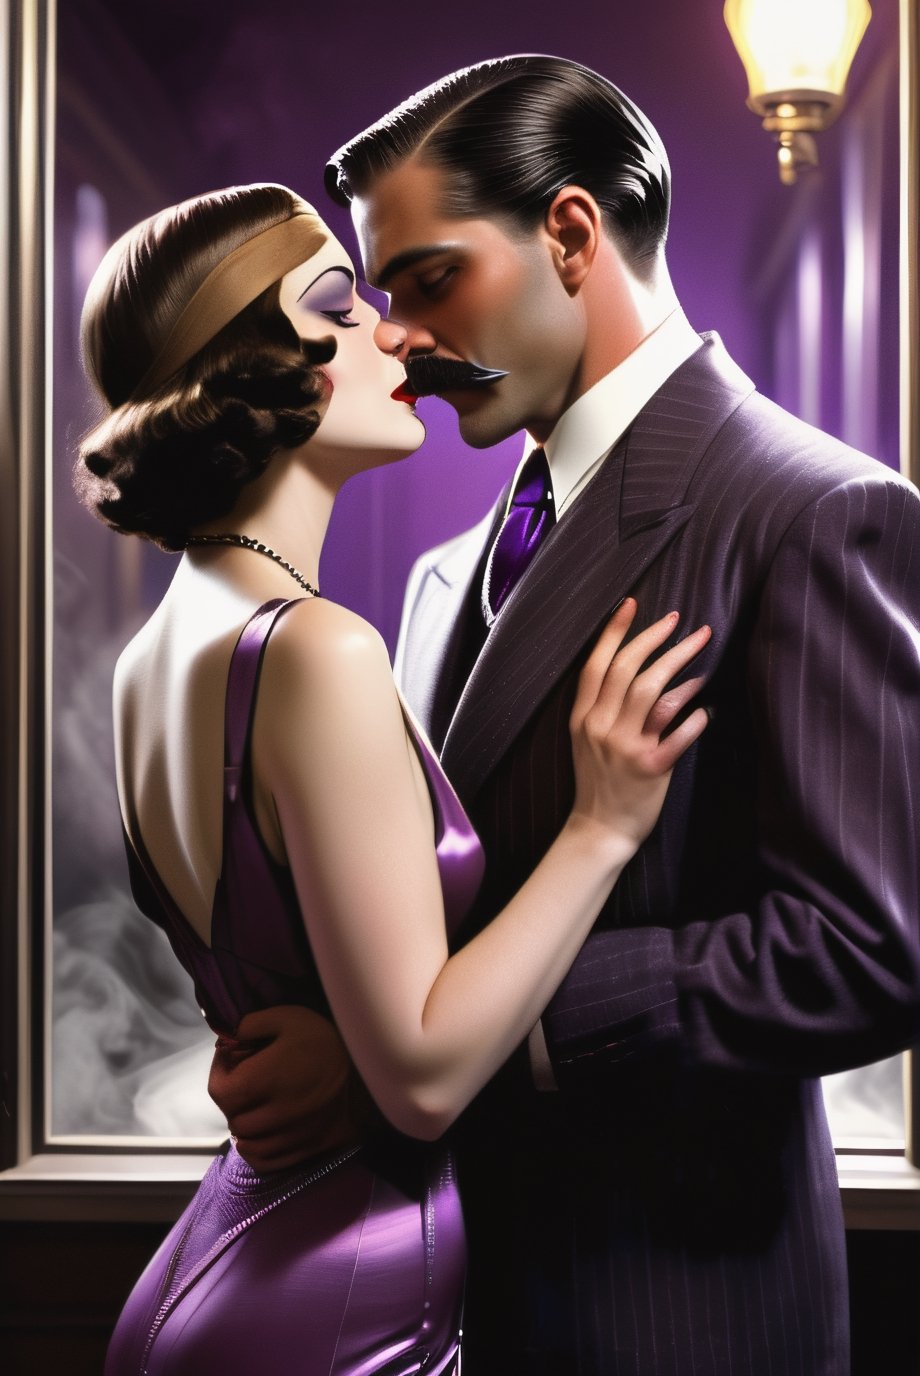 Create an image in the style of 1930s hard-boiled novel illustrations, depicting a scene where a man with a dapper 1930s look, tailored suit, with long brown hair, mustache and goatee, in a close embrace with a mystical woman with sleek purple hair reminiscent of the era's flapper style. The man exudes a gritty, noir detective vibe, while the woman, with her enchanting appearance, seems like a figure shrouded in mystery and allure typical of a femme fatale. The scene is set in a dimly lit, smoke-filled room that hints at an underground speakeasy or a private detective's office, with subtle elements of green and purple lighting casting an eerie yet captivating glow around the two figures, suggesting an underlying layer of magic and intrigue. The passionate kiss between the two should be the central element, drawing the viewer into this moment of intense connection amidst a backdrop that blends the hard-edged realism of the '30s with a touch of the fantastical. 